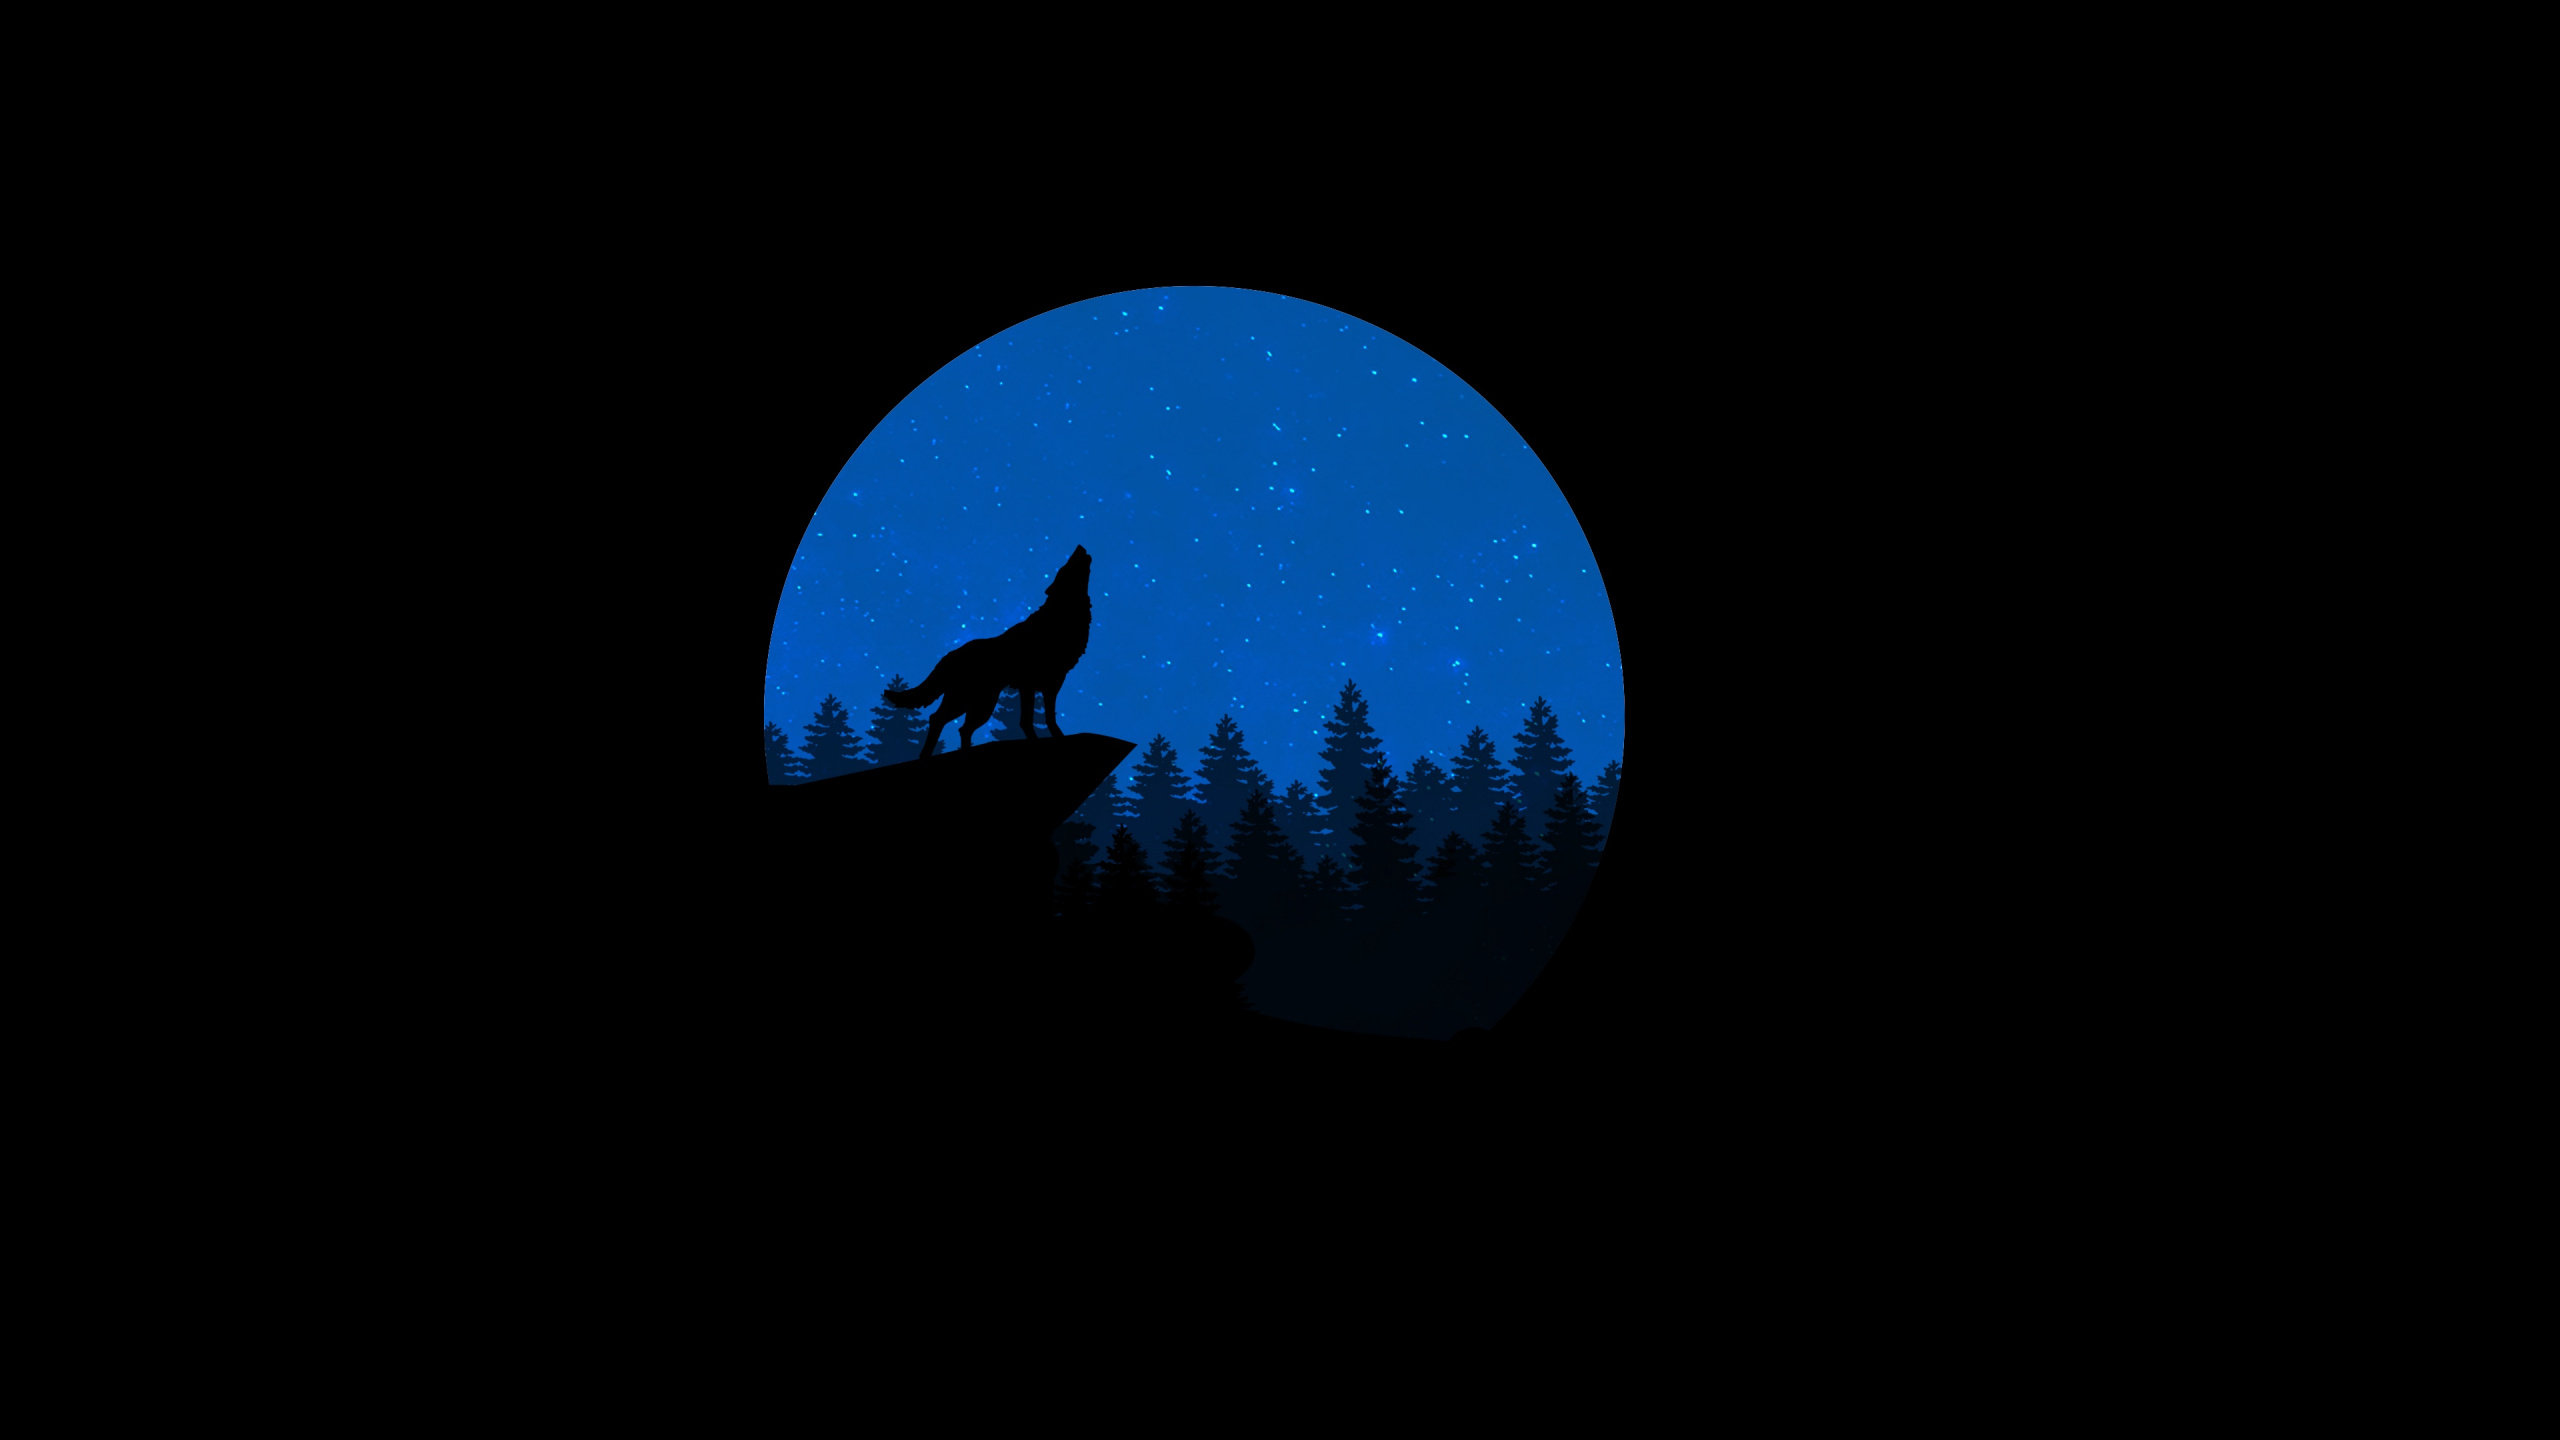 Silhouette of Person Standing Under Blue Moon. Wallpaper in 2560x1440 Resolution